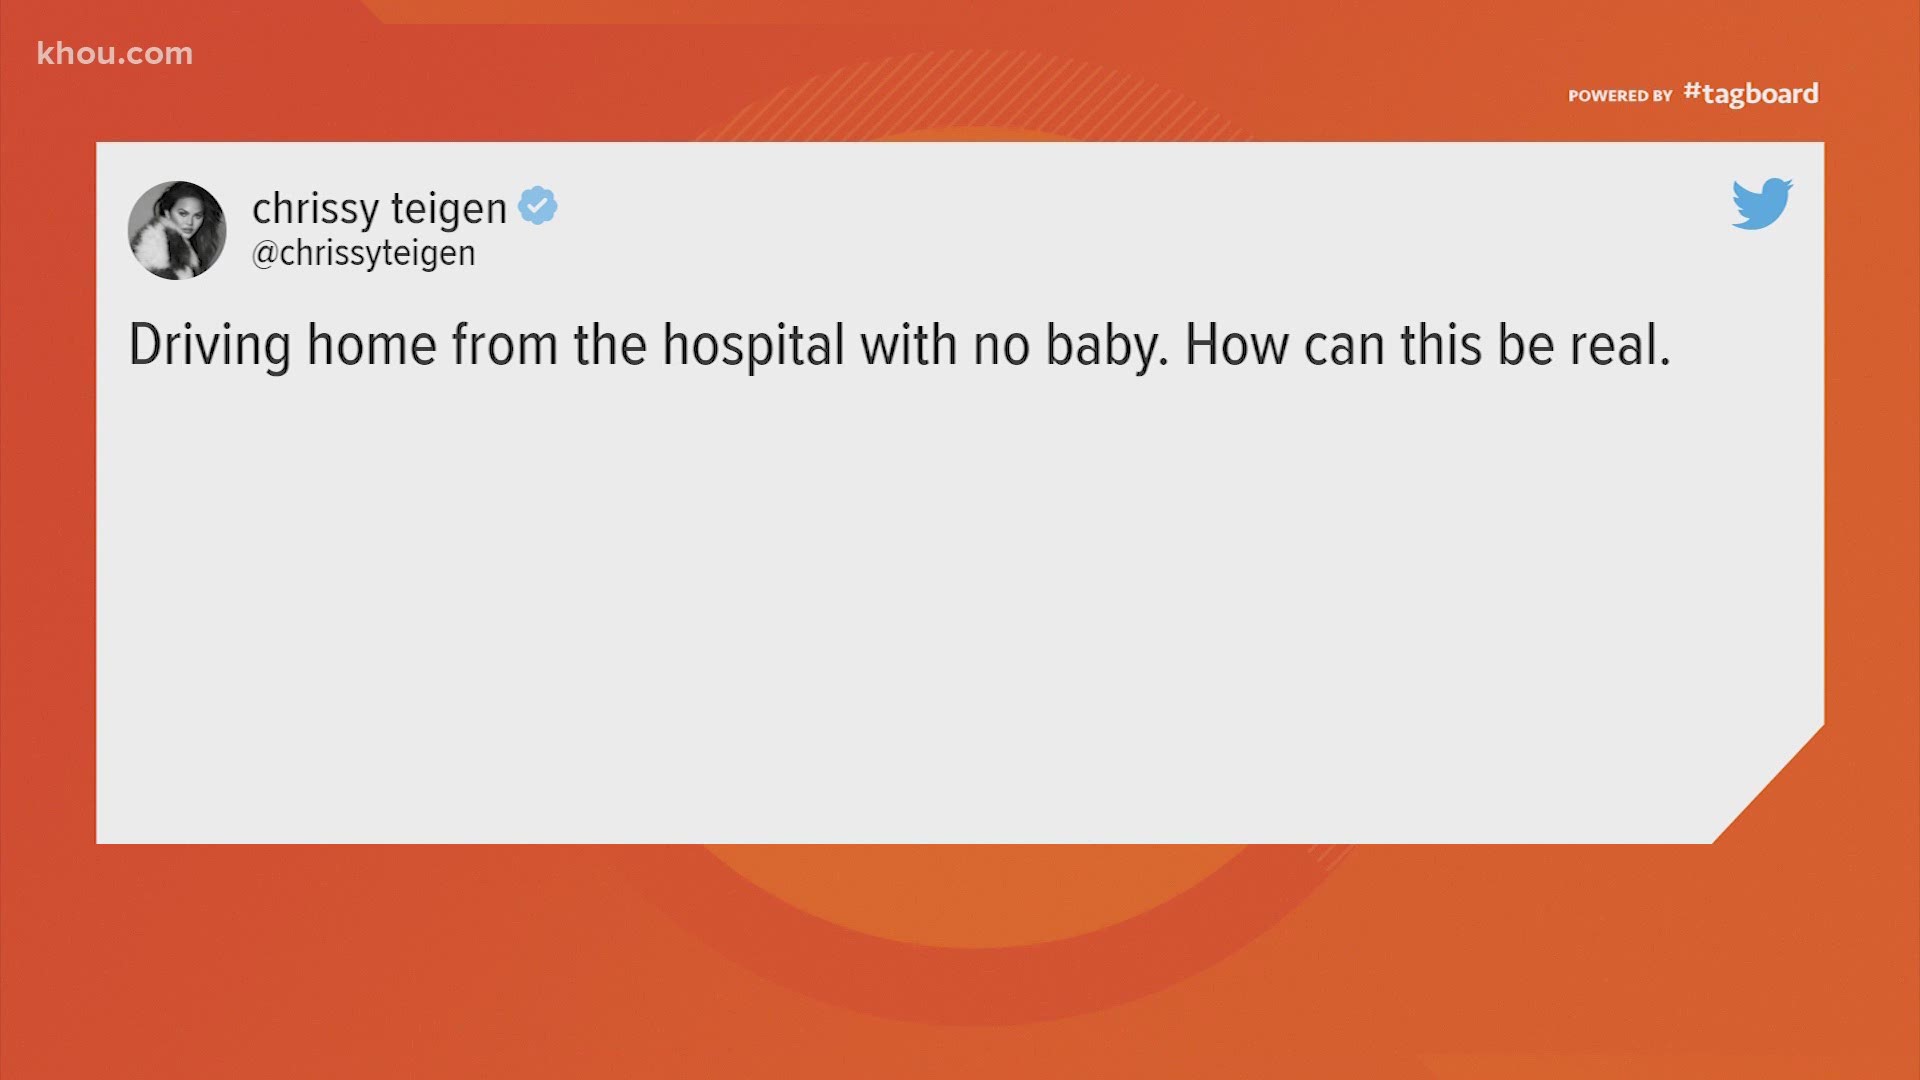 Chrissy Teigen shared that she and her husband, John Legend, lost their baby due to pregnancy complications.